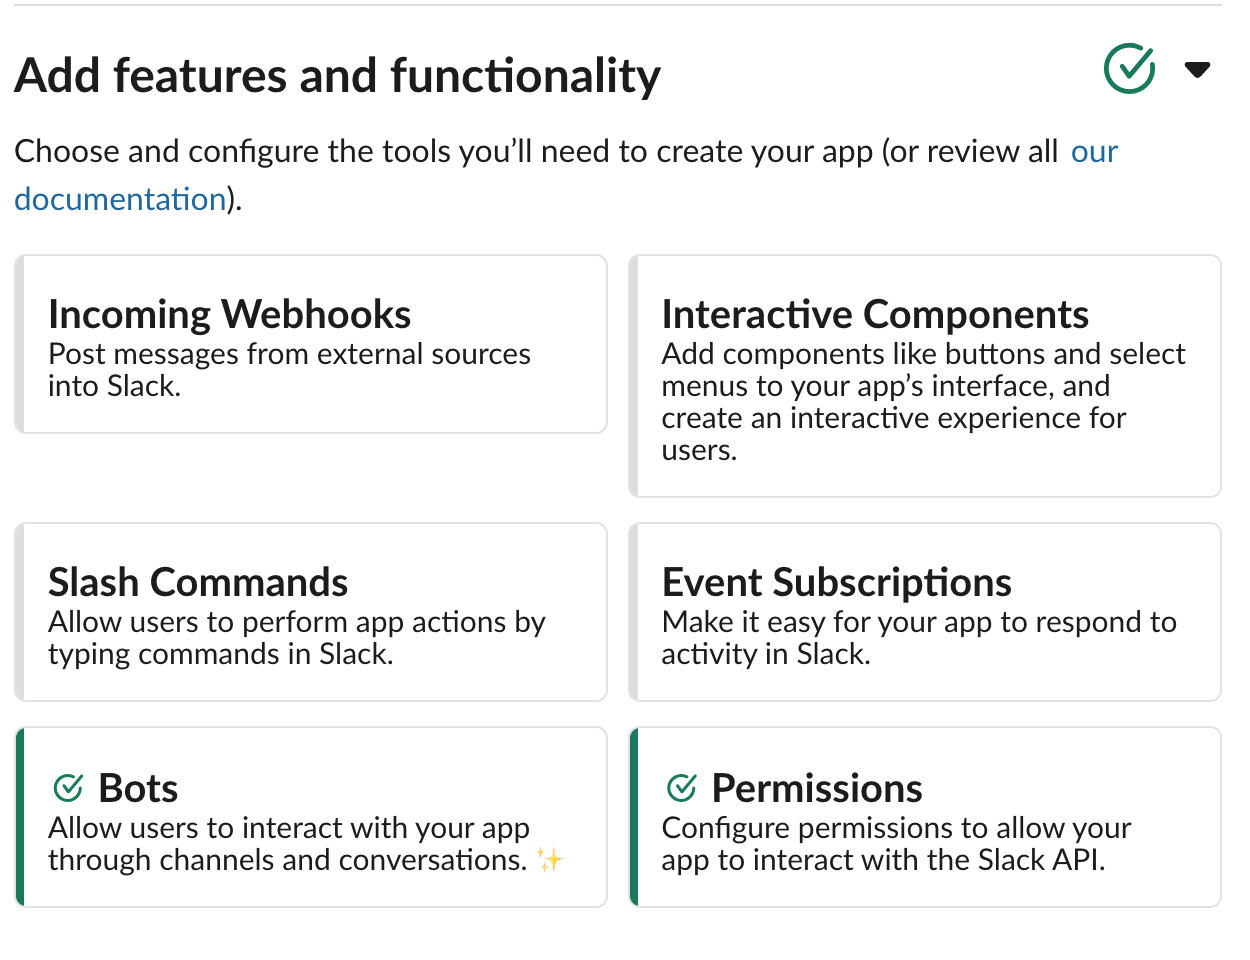 Slack App features and functionality